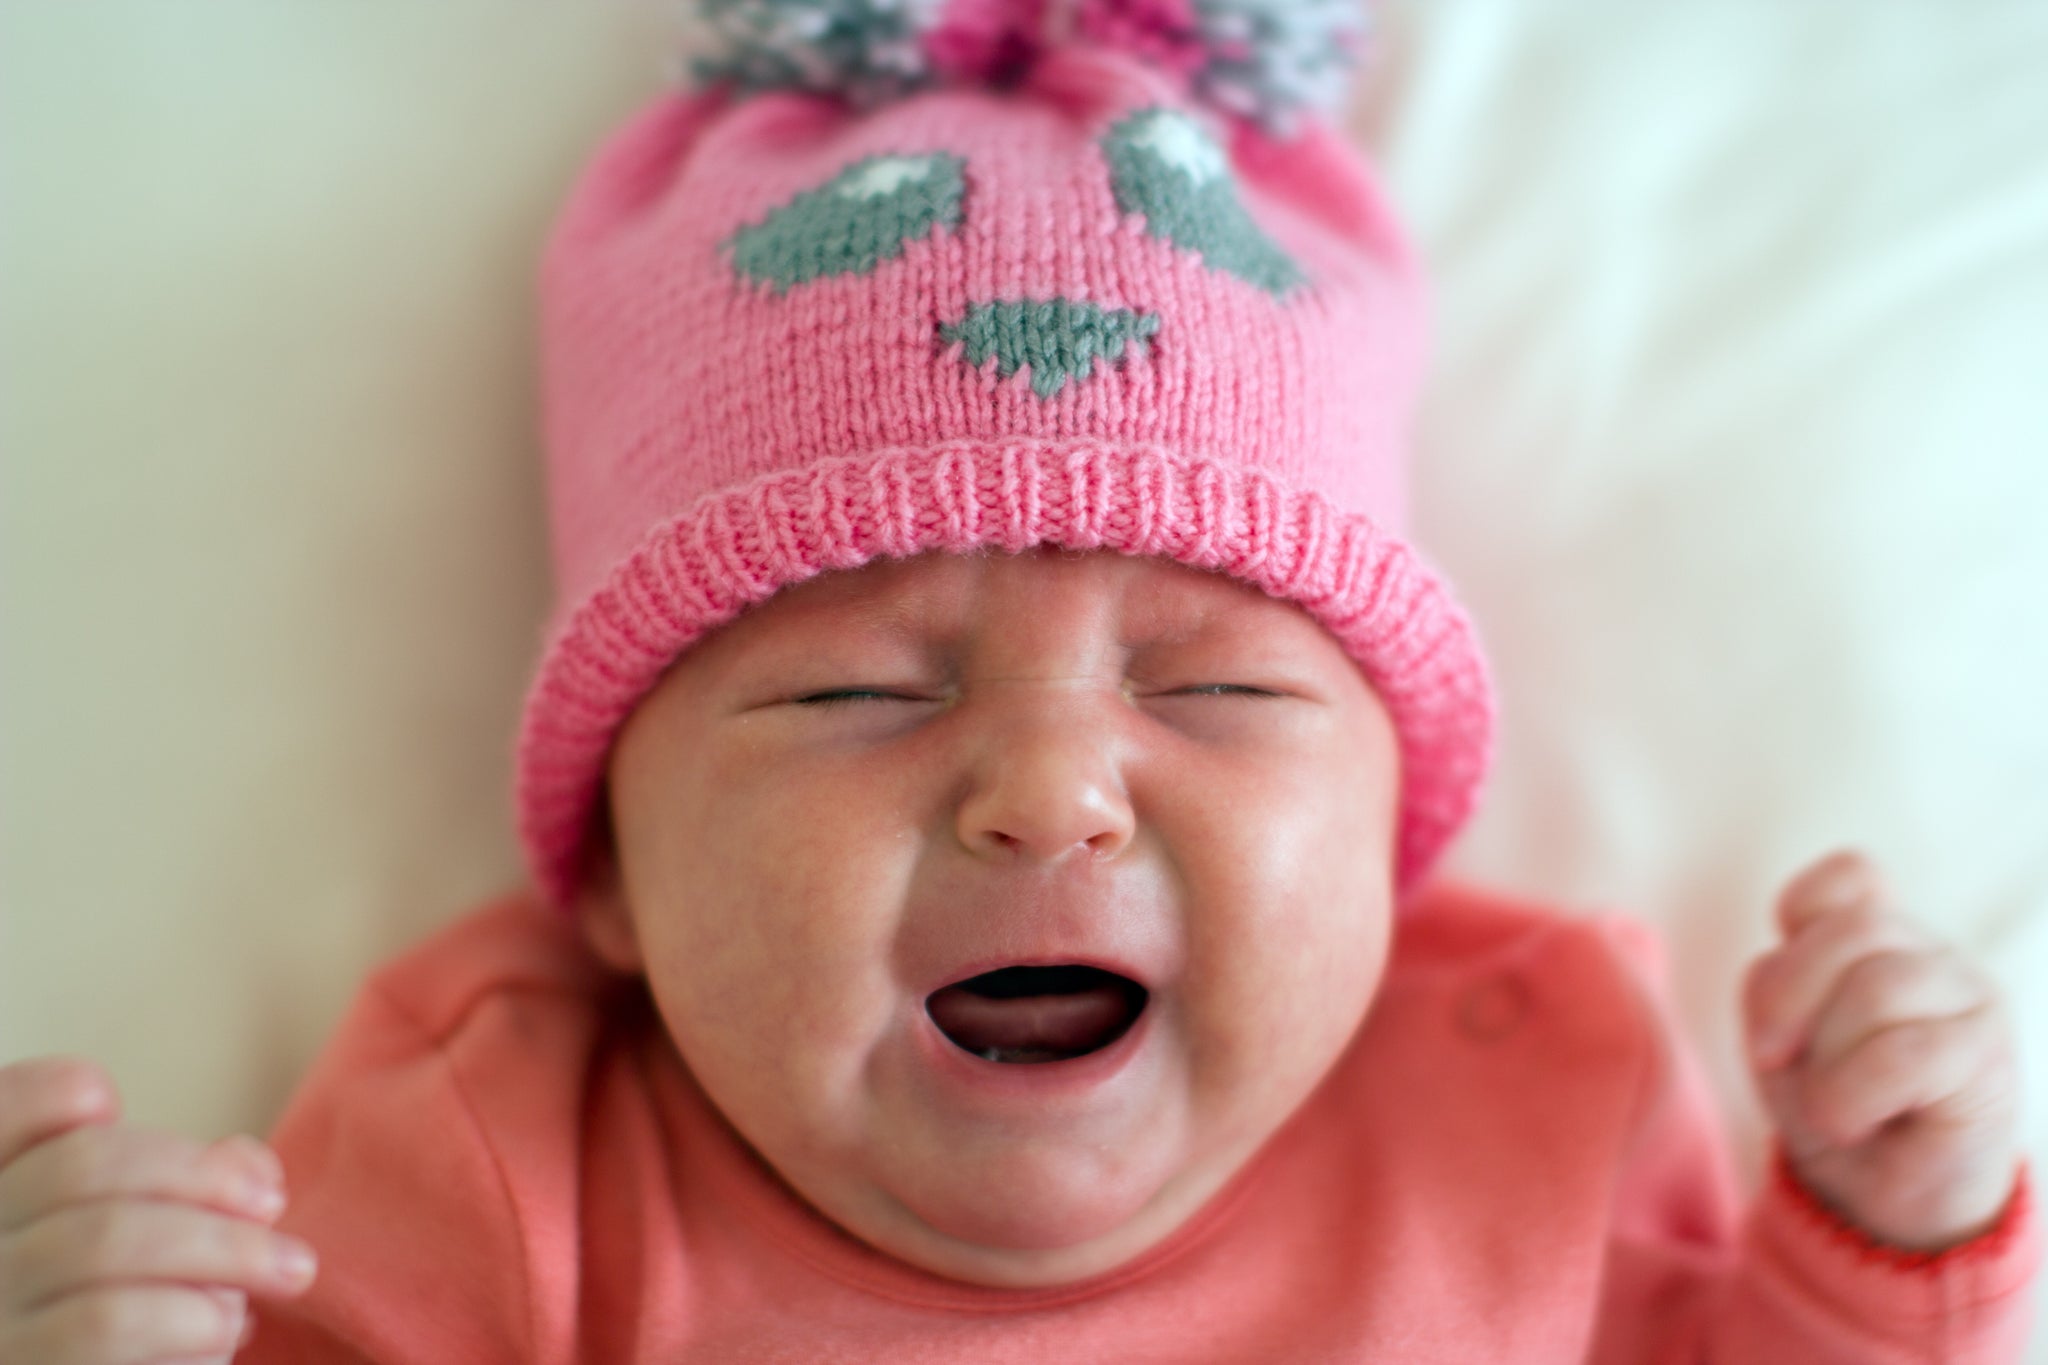 Top Tips to Calm a Fussy Baby